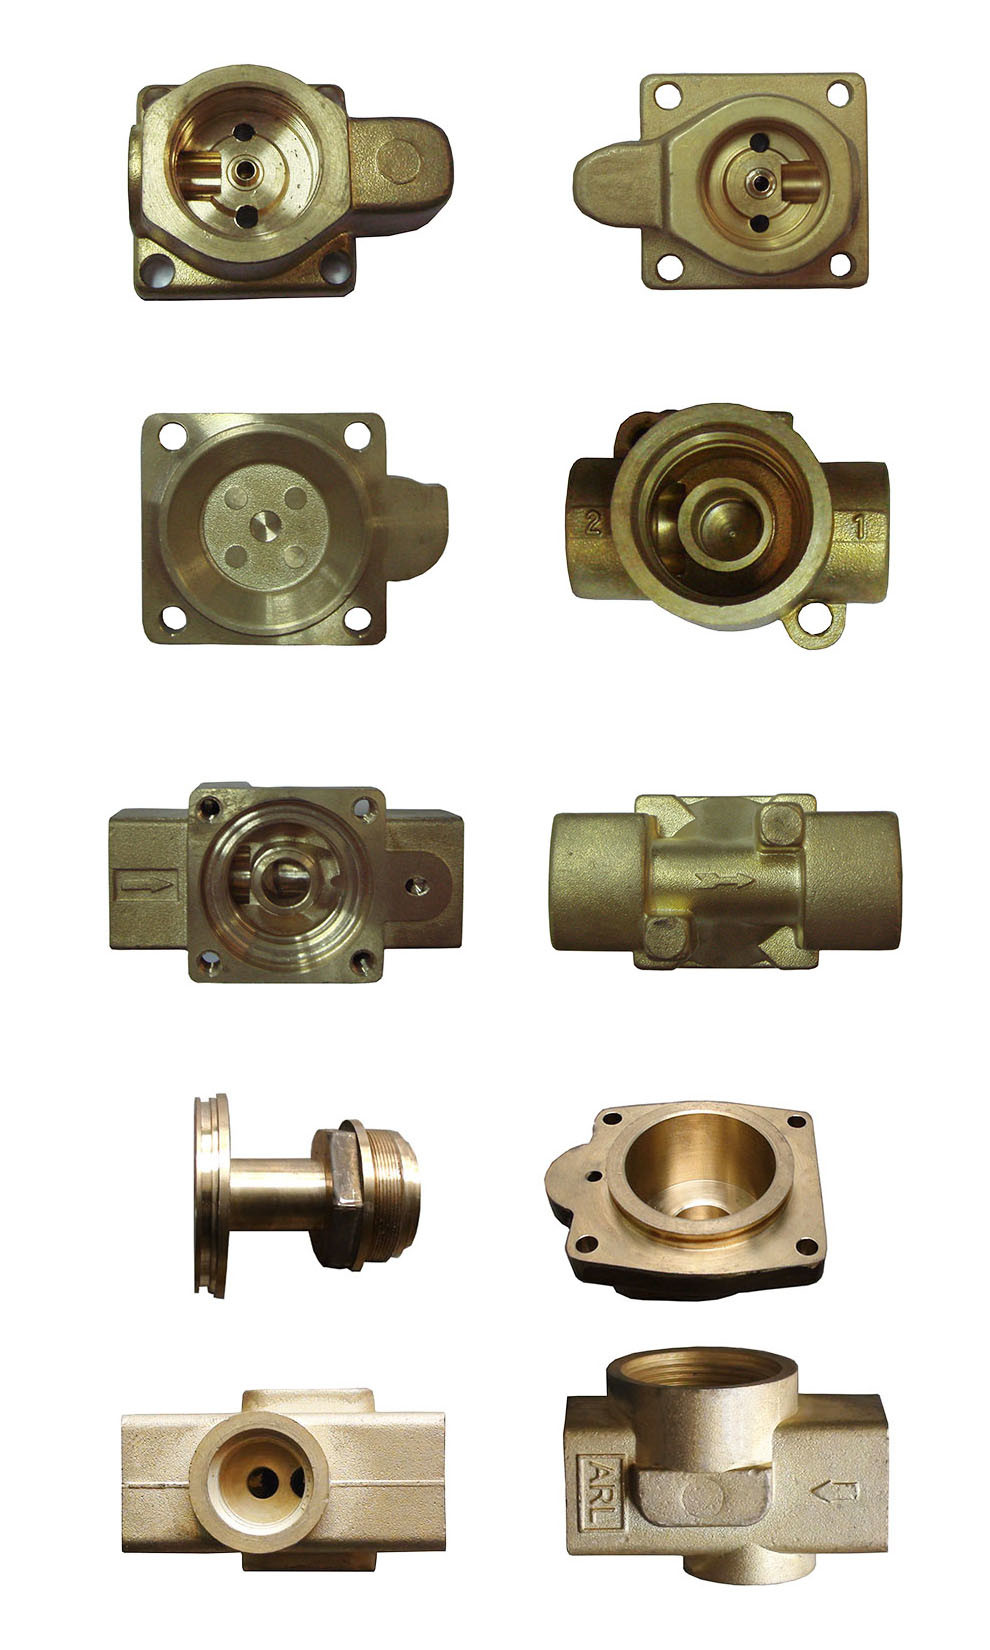 Solenoid Valve Part Made of Brass Forging with CNC Machining